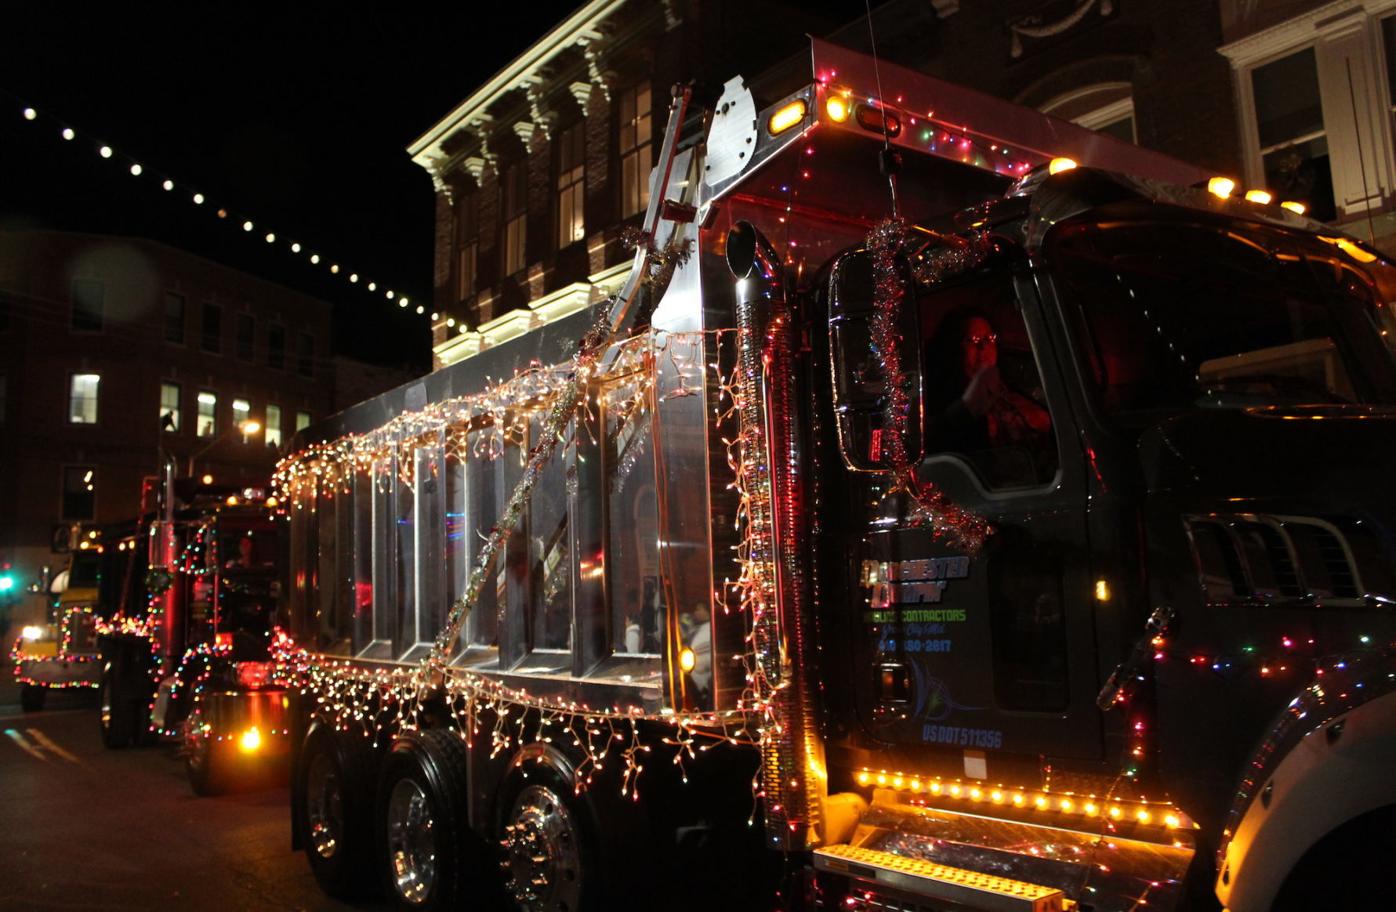 Cambridge Christmas parade features 'Past and Present' Local